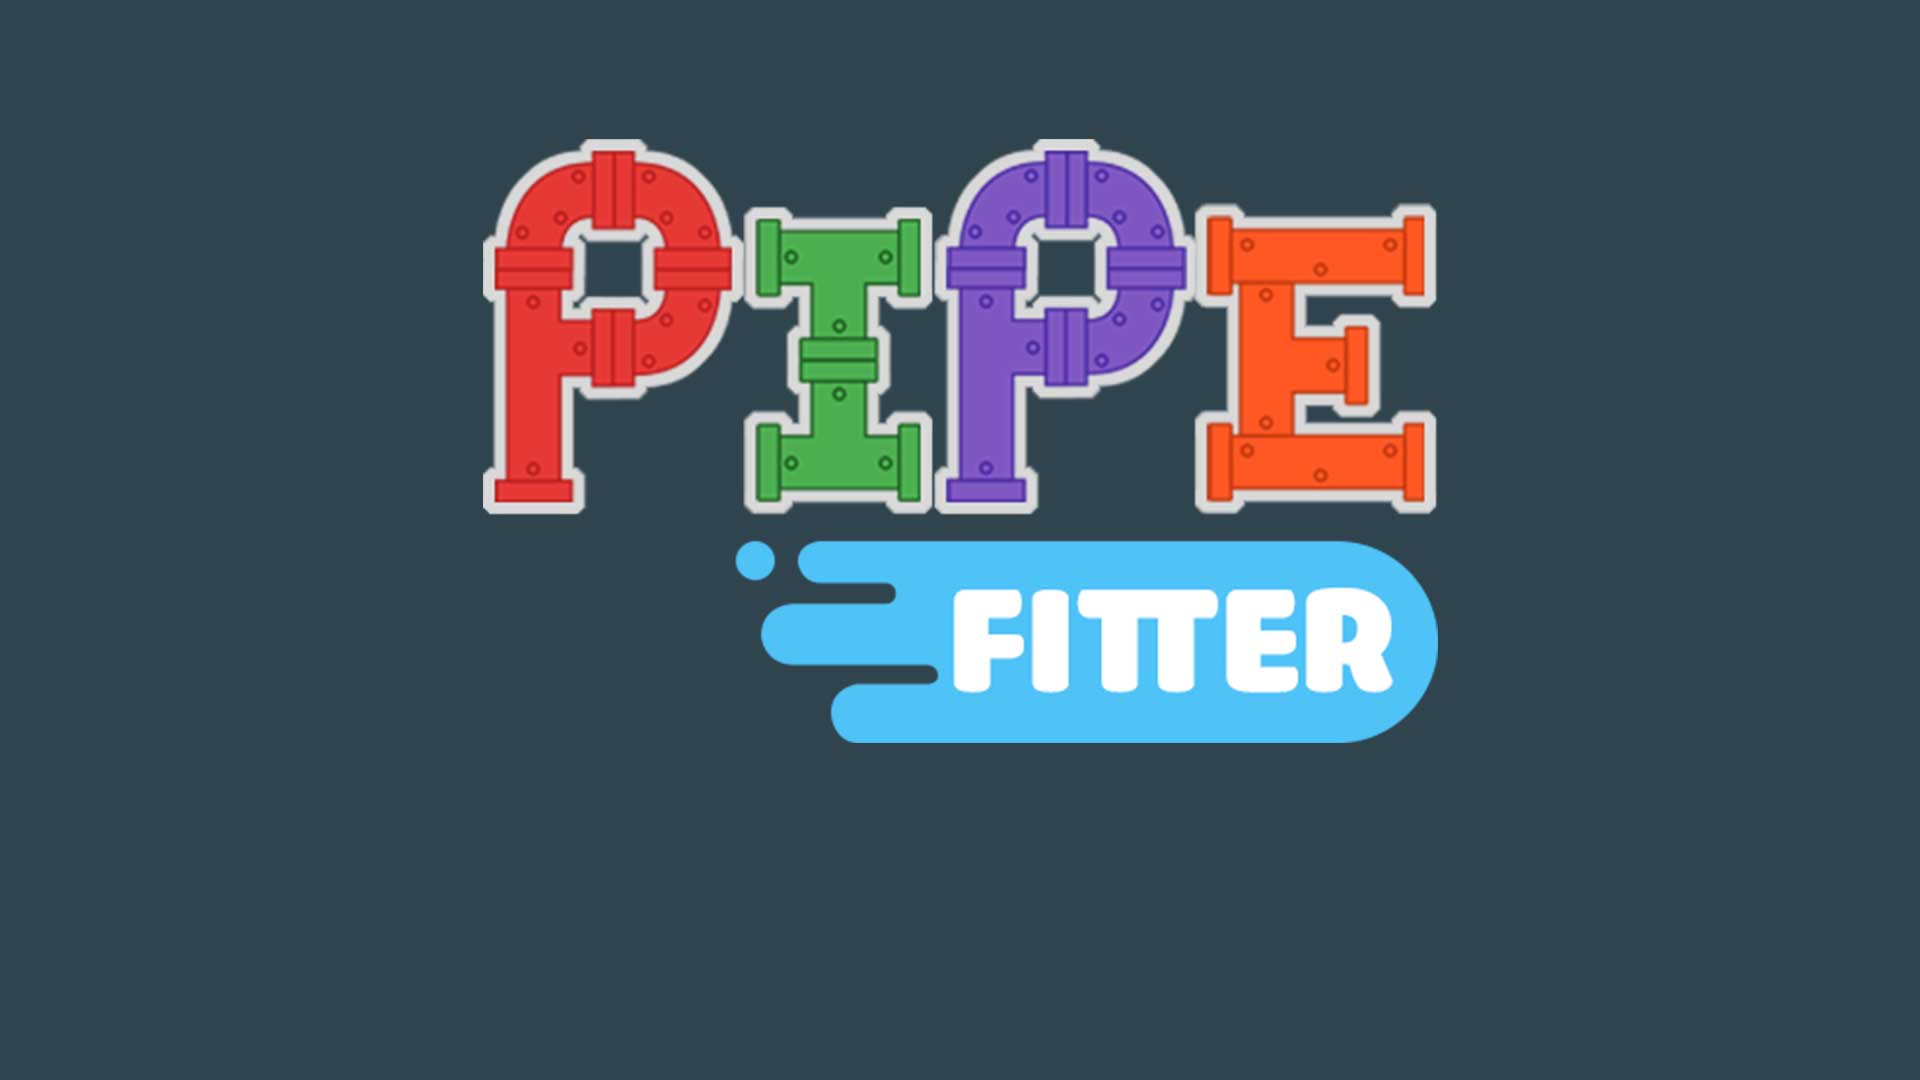 Pipe Fitter